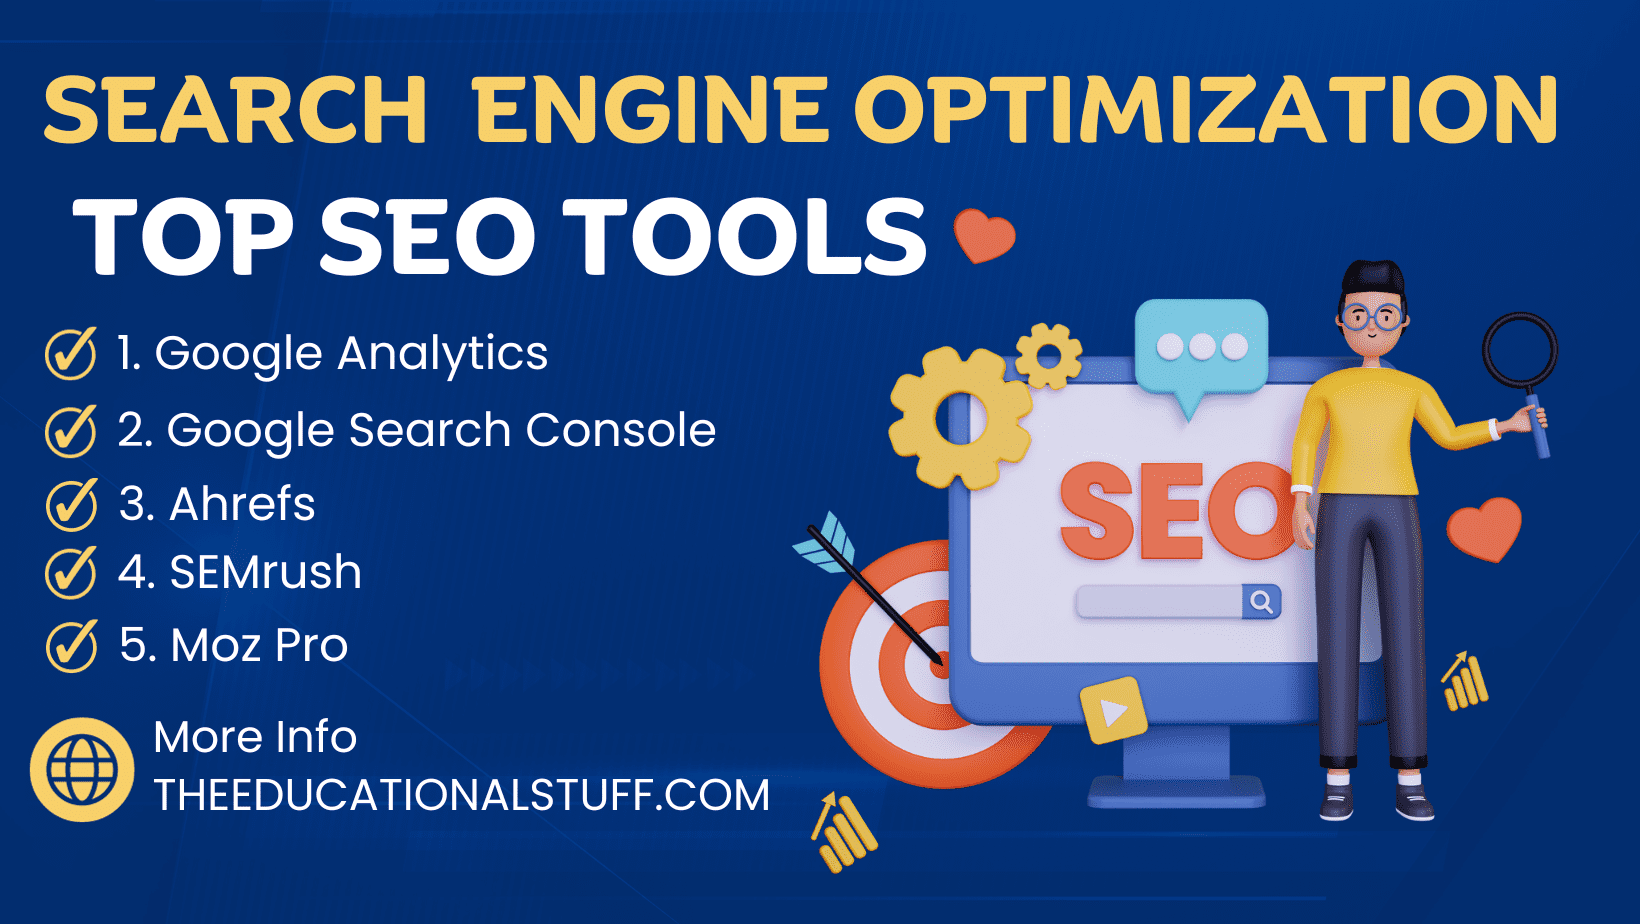 5 Best SEO Tools Their Uses And Benefits